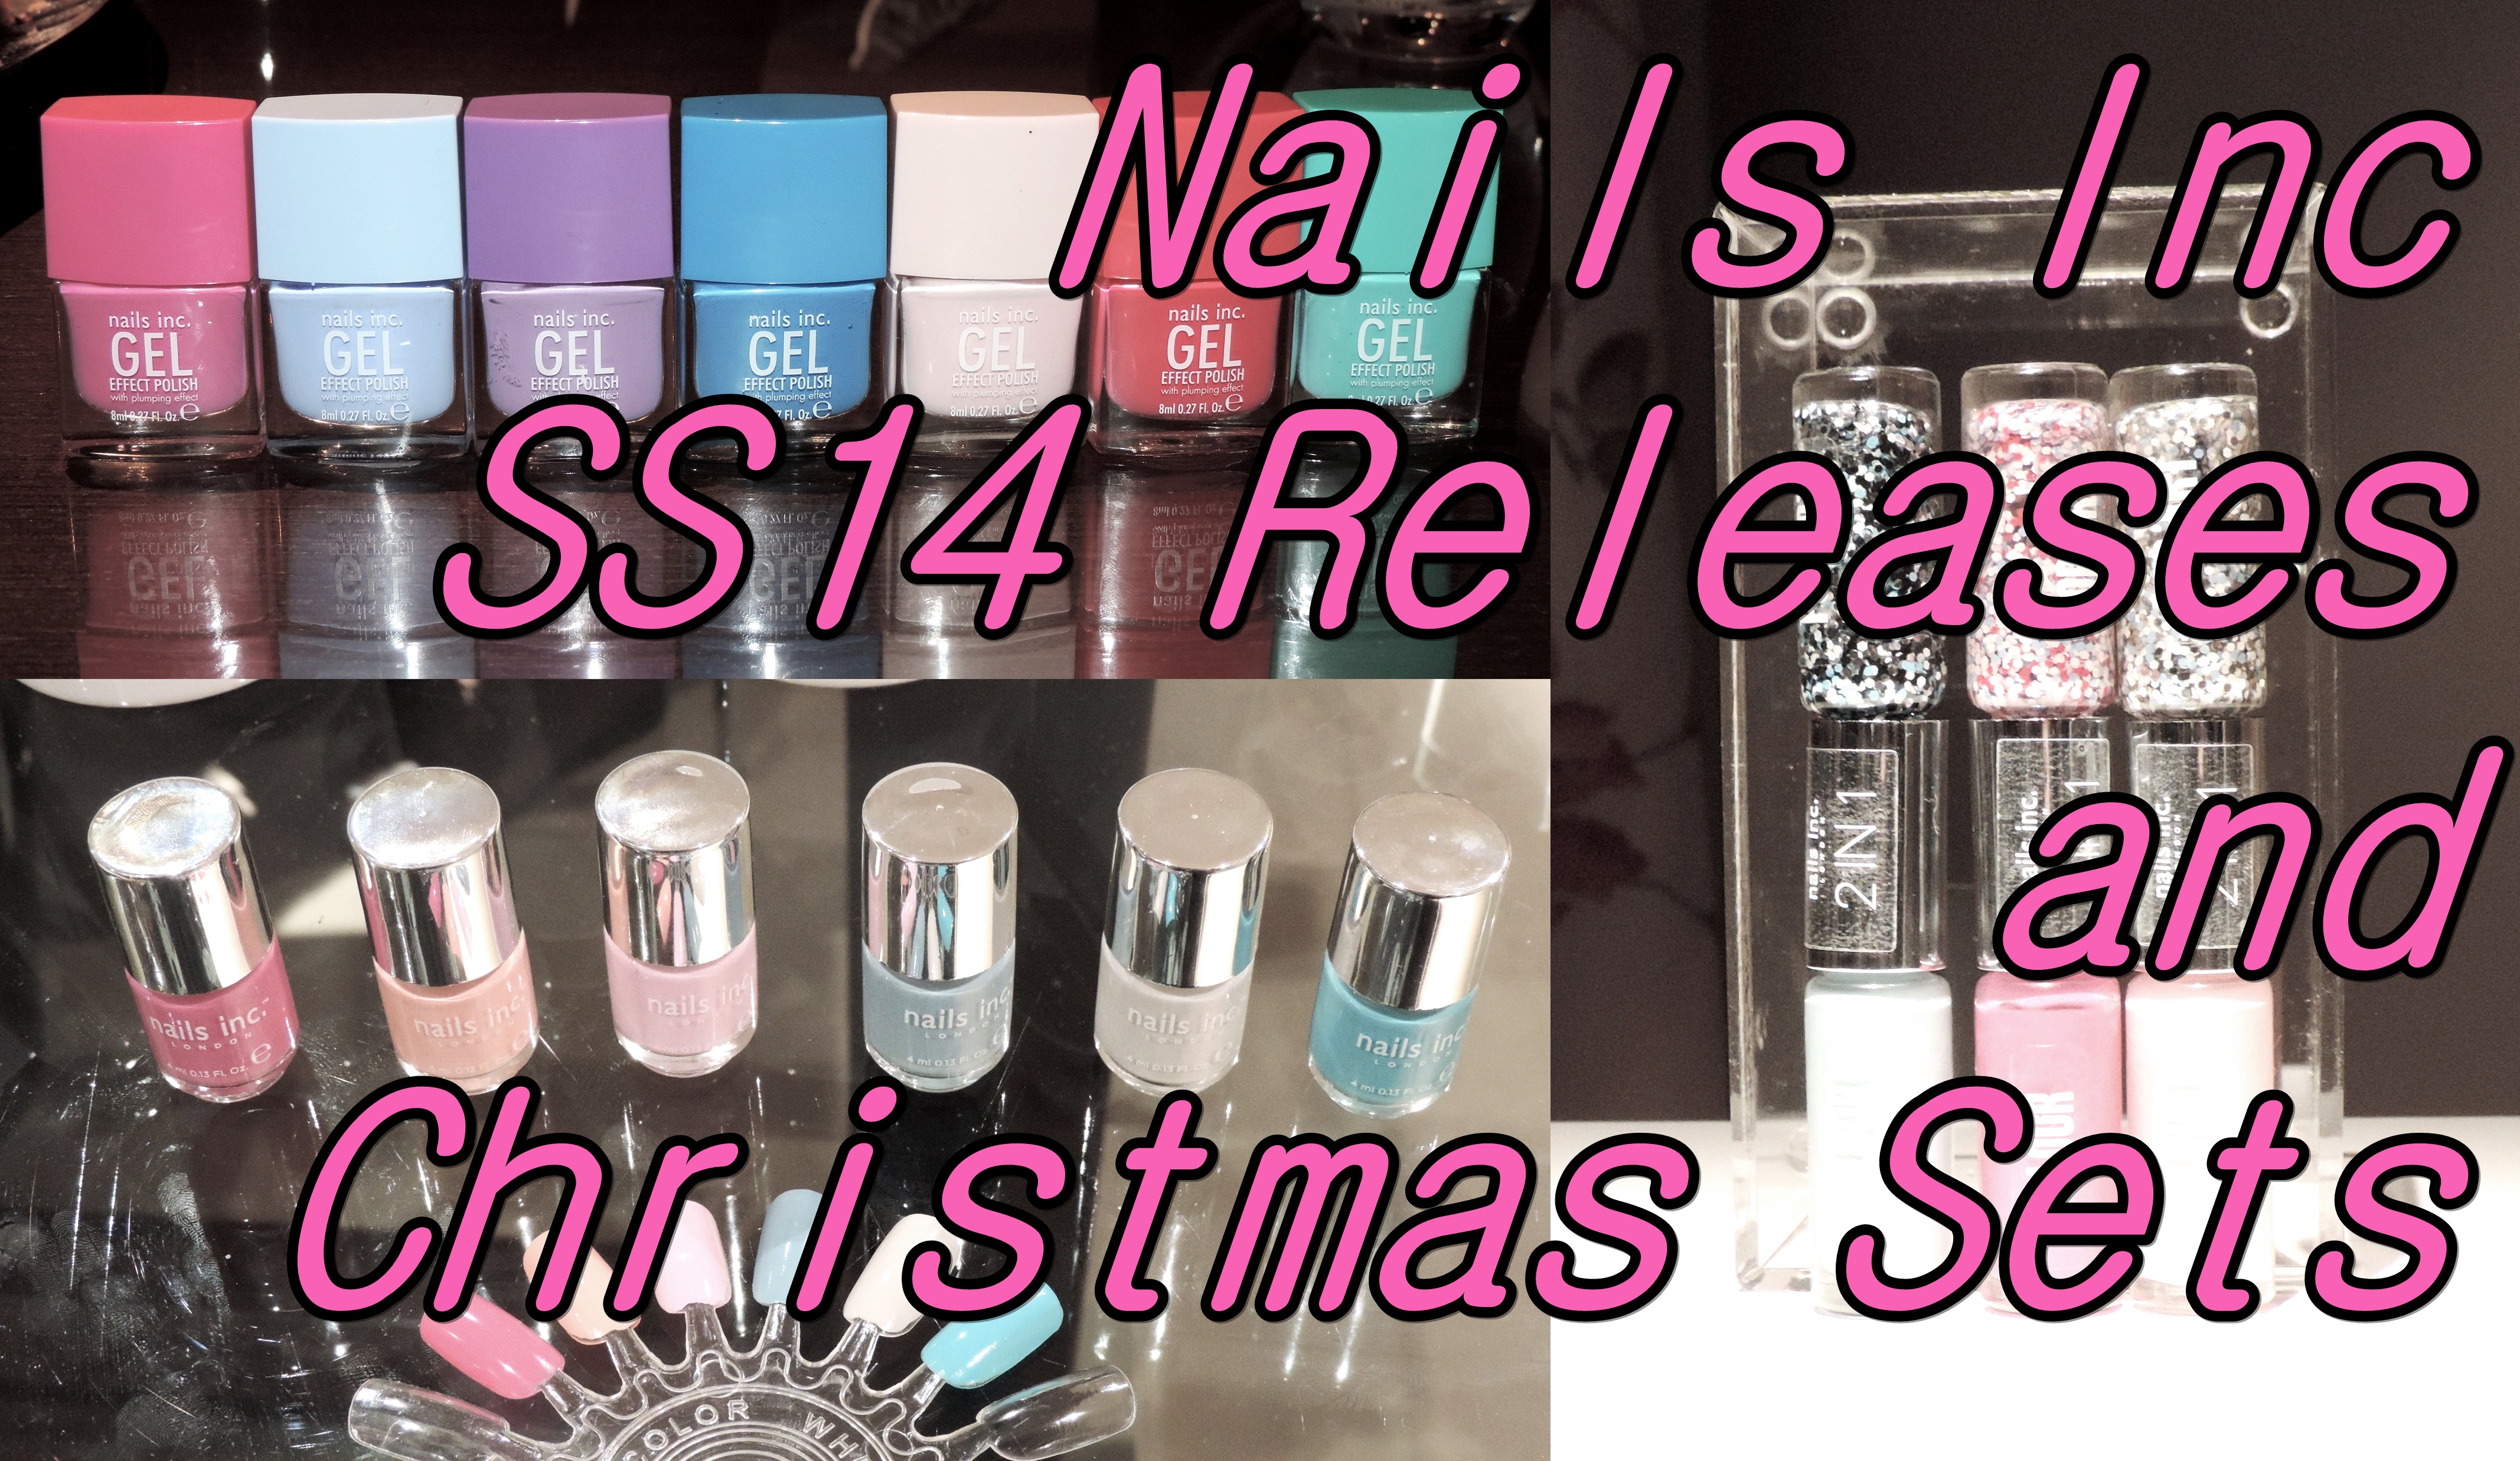 Nails Inc Upcoming Releases